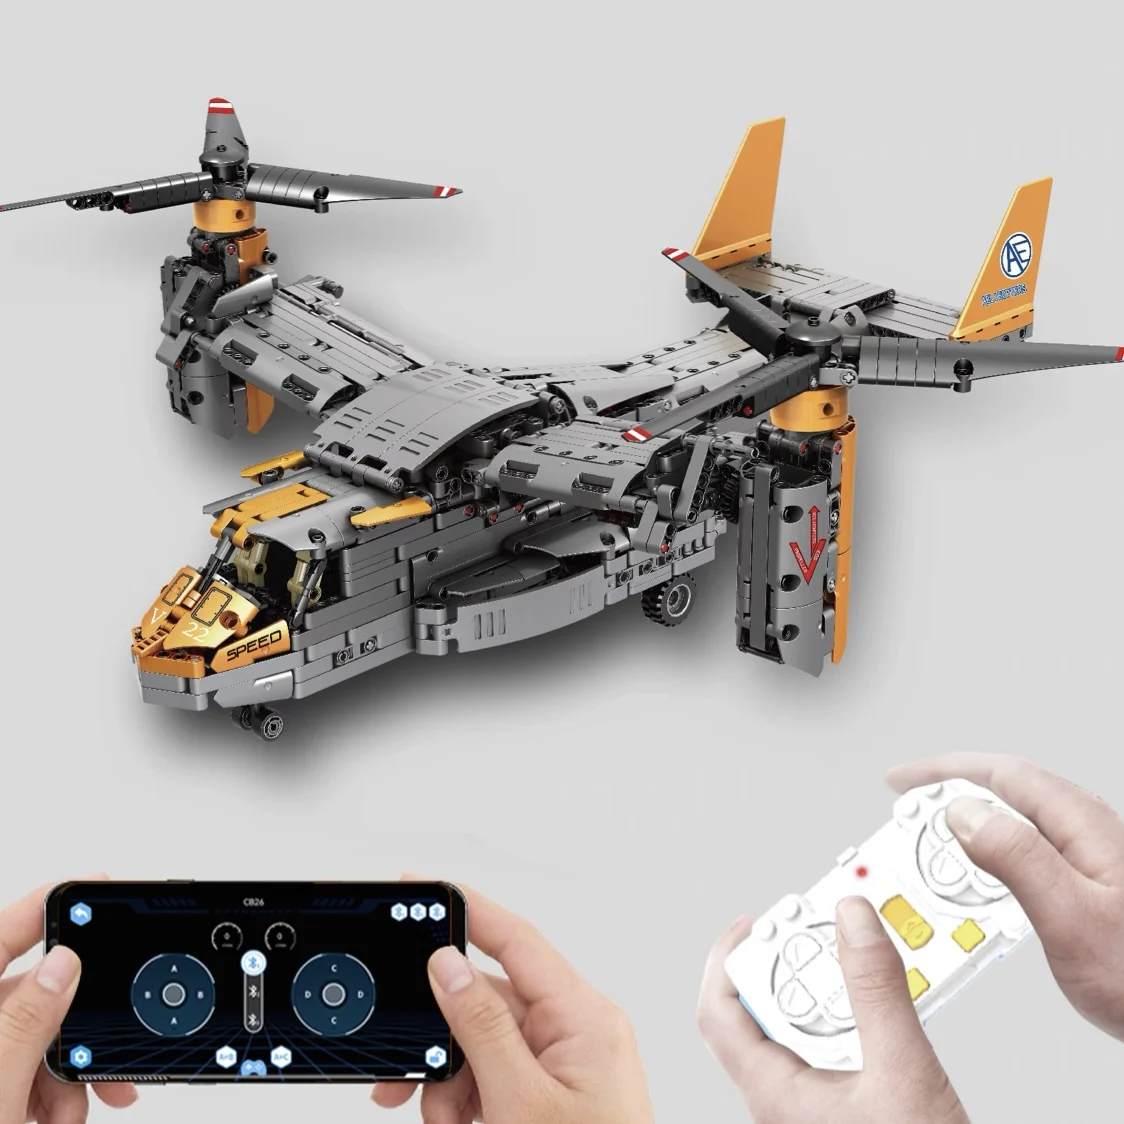 

WW2 High-tech Military Weapon Remote Control The V-22 Osprey Airplane Model Building Block Fighter RC Brick Toys Kids Gift 42113